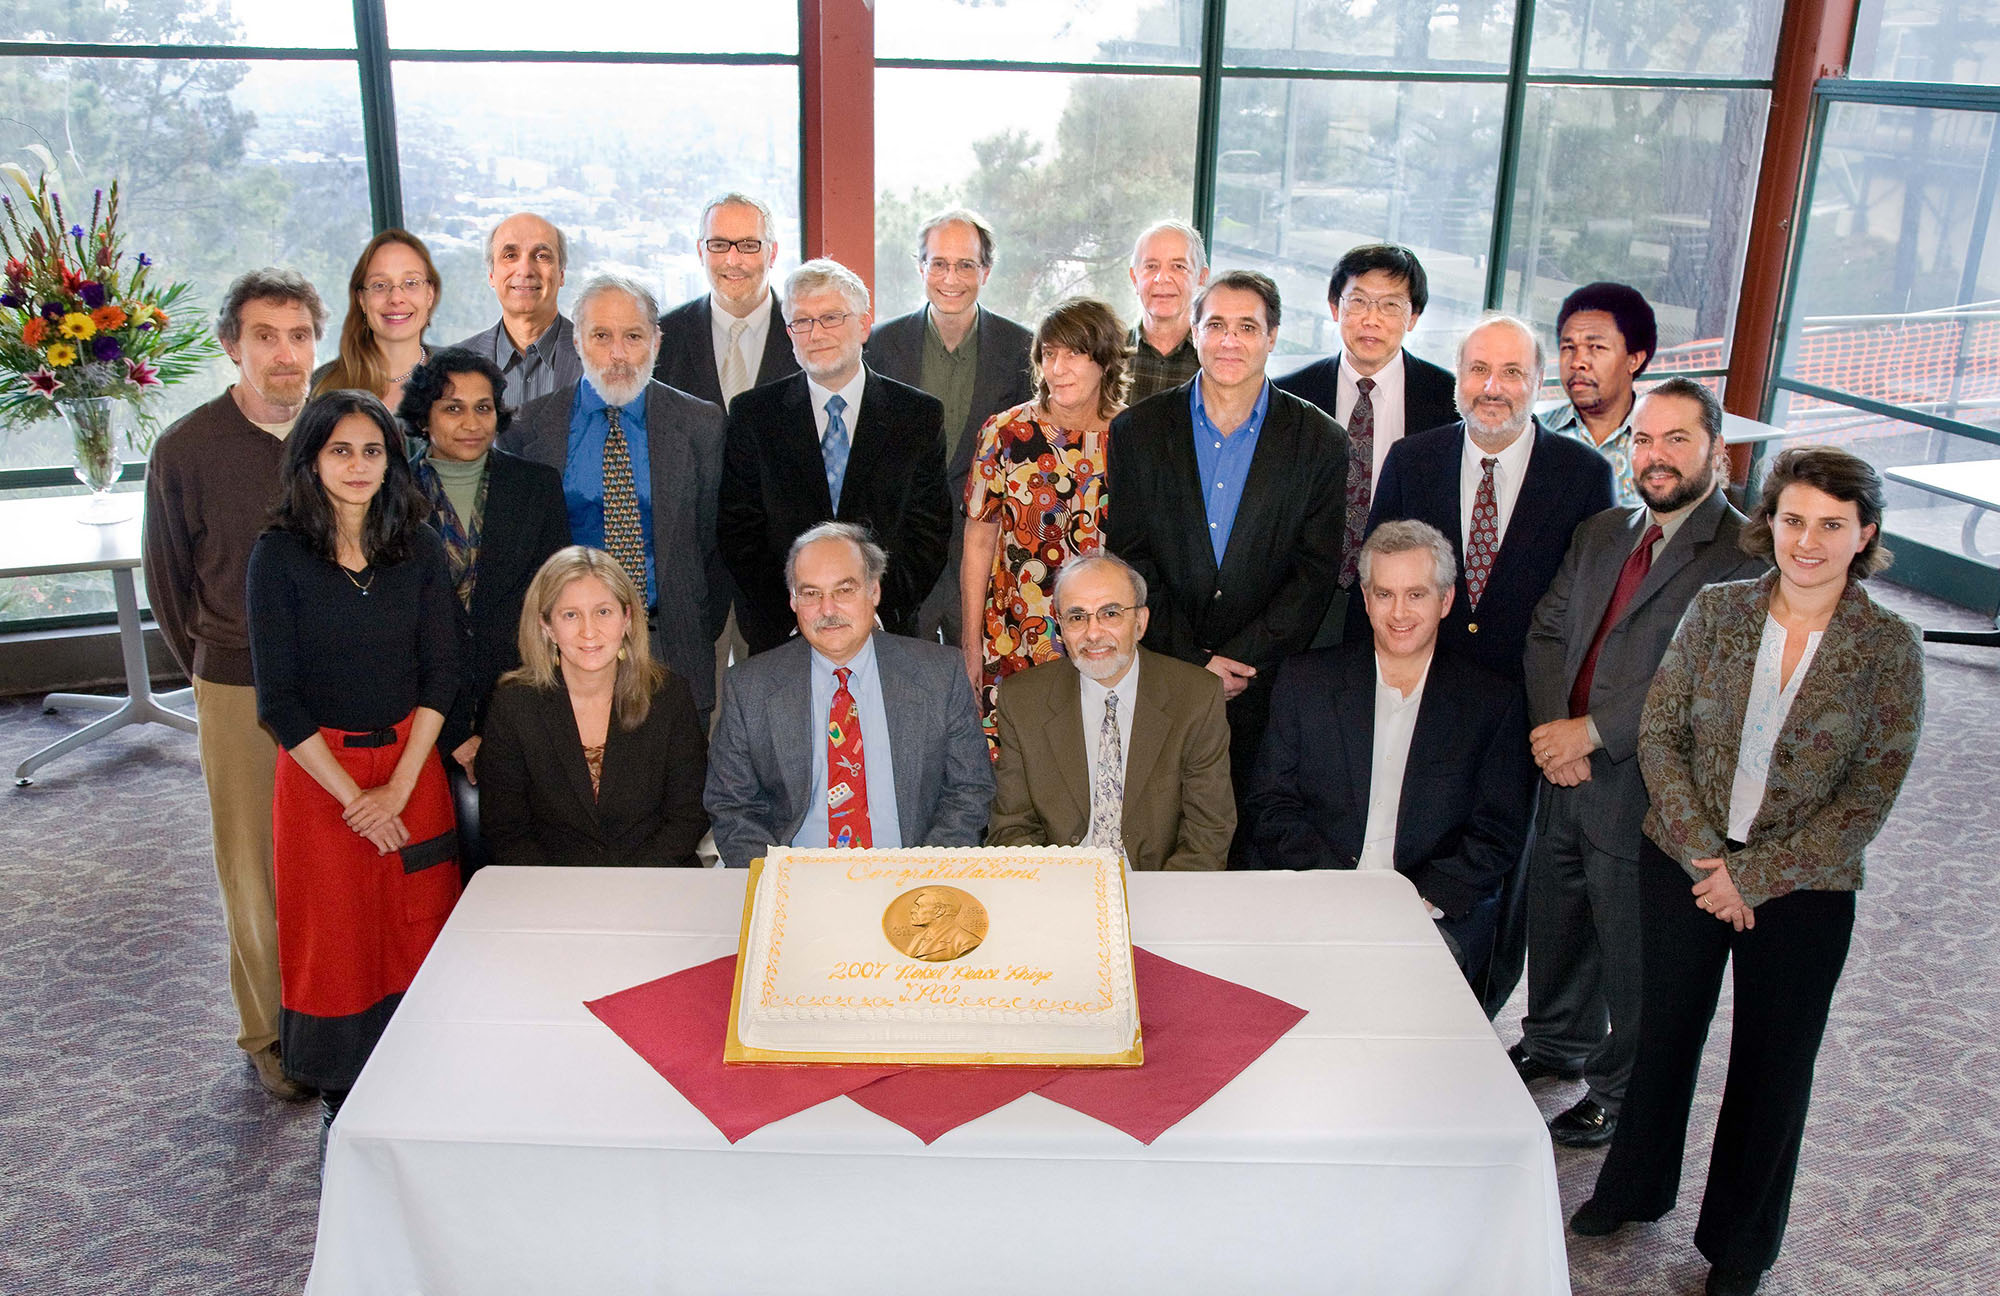 Berkeley Lab employees who contributed to reports by the United Nations' Intergovernmental Panel on Climate Change, which shared the Peace Prize with former Vice President Al Gore, pose for a picture.